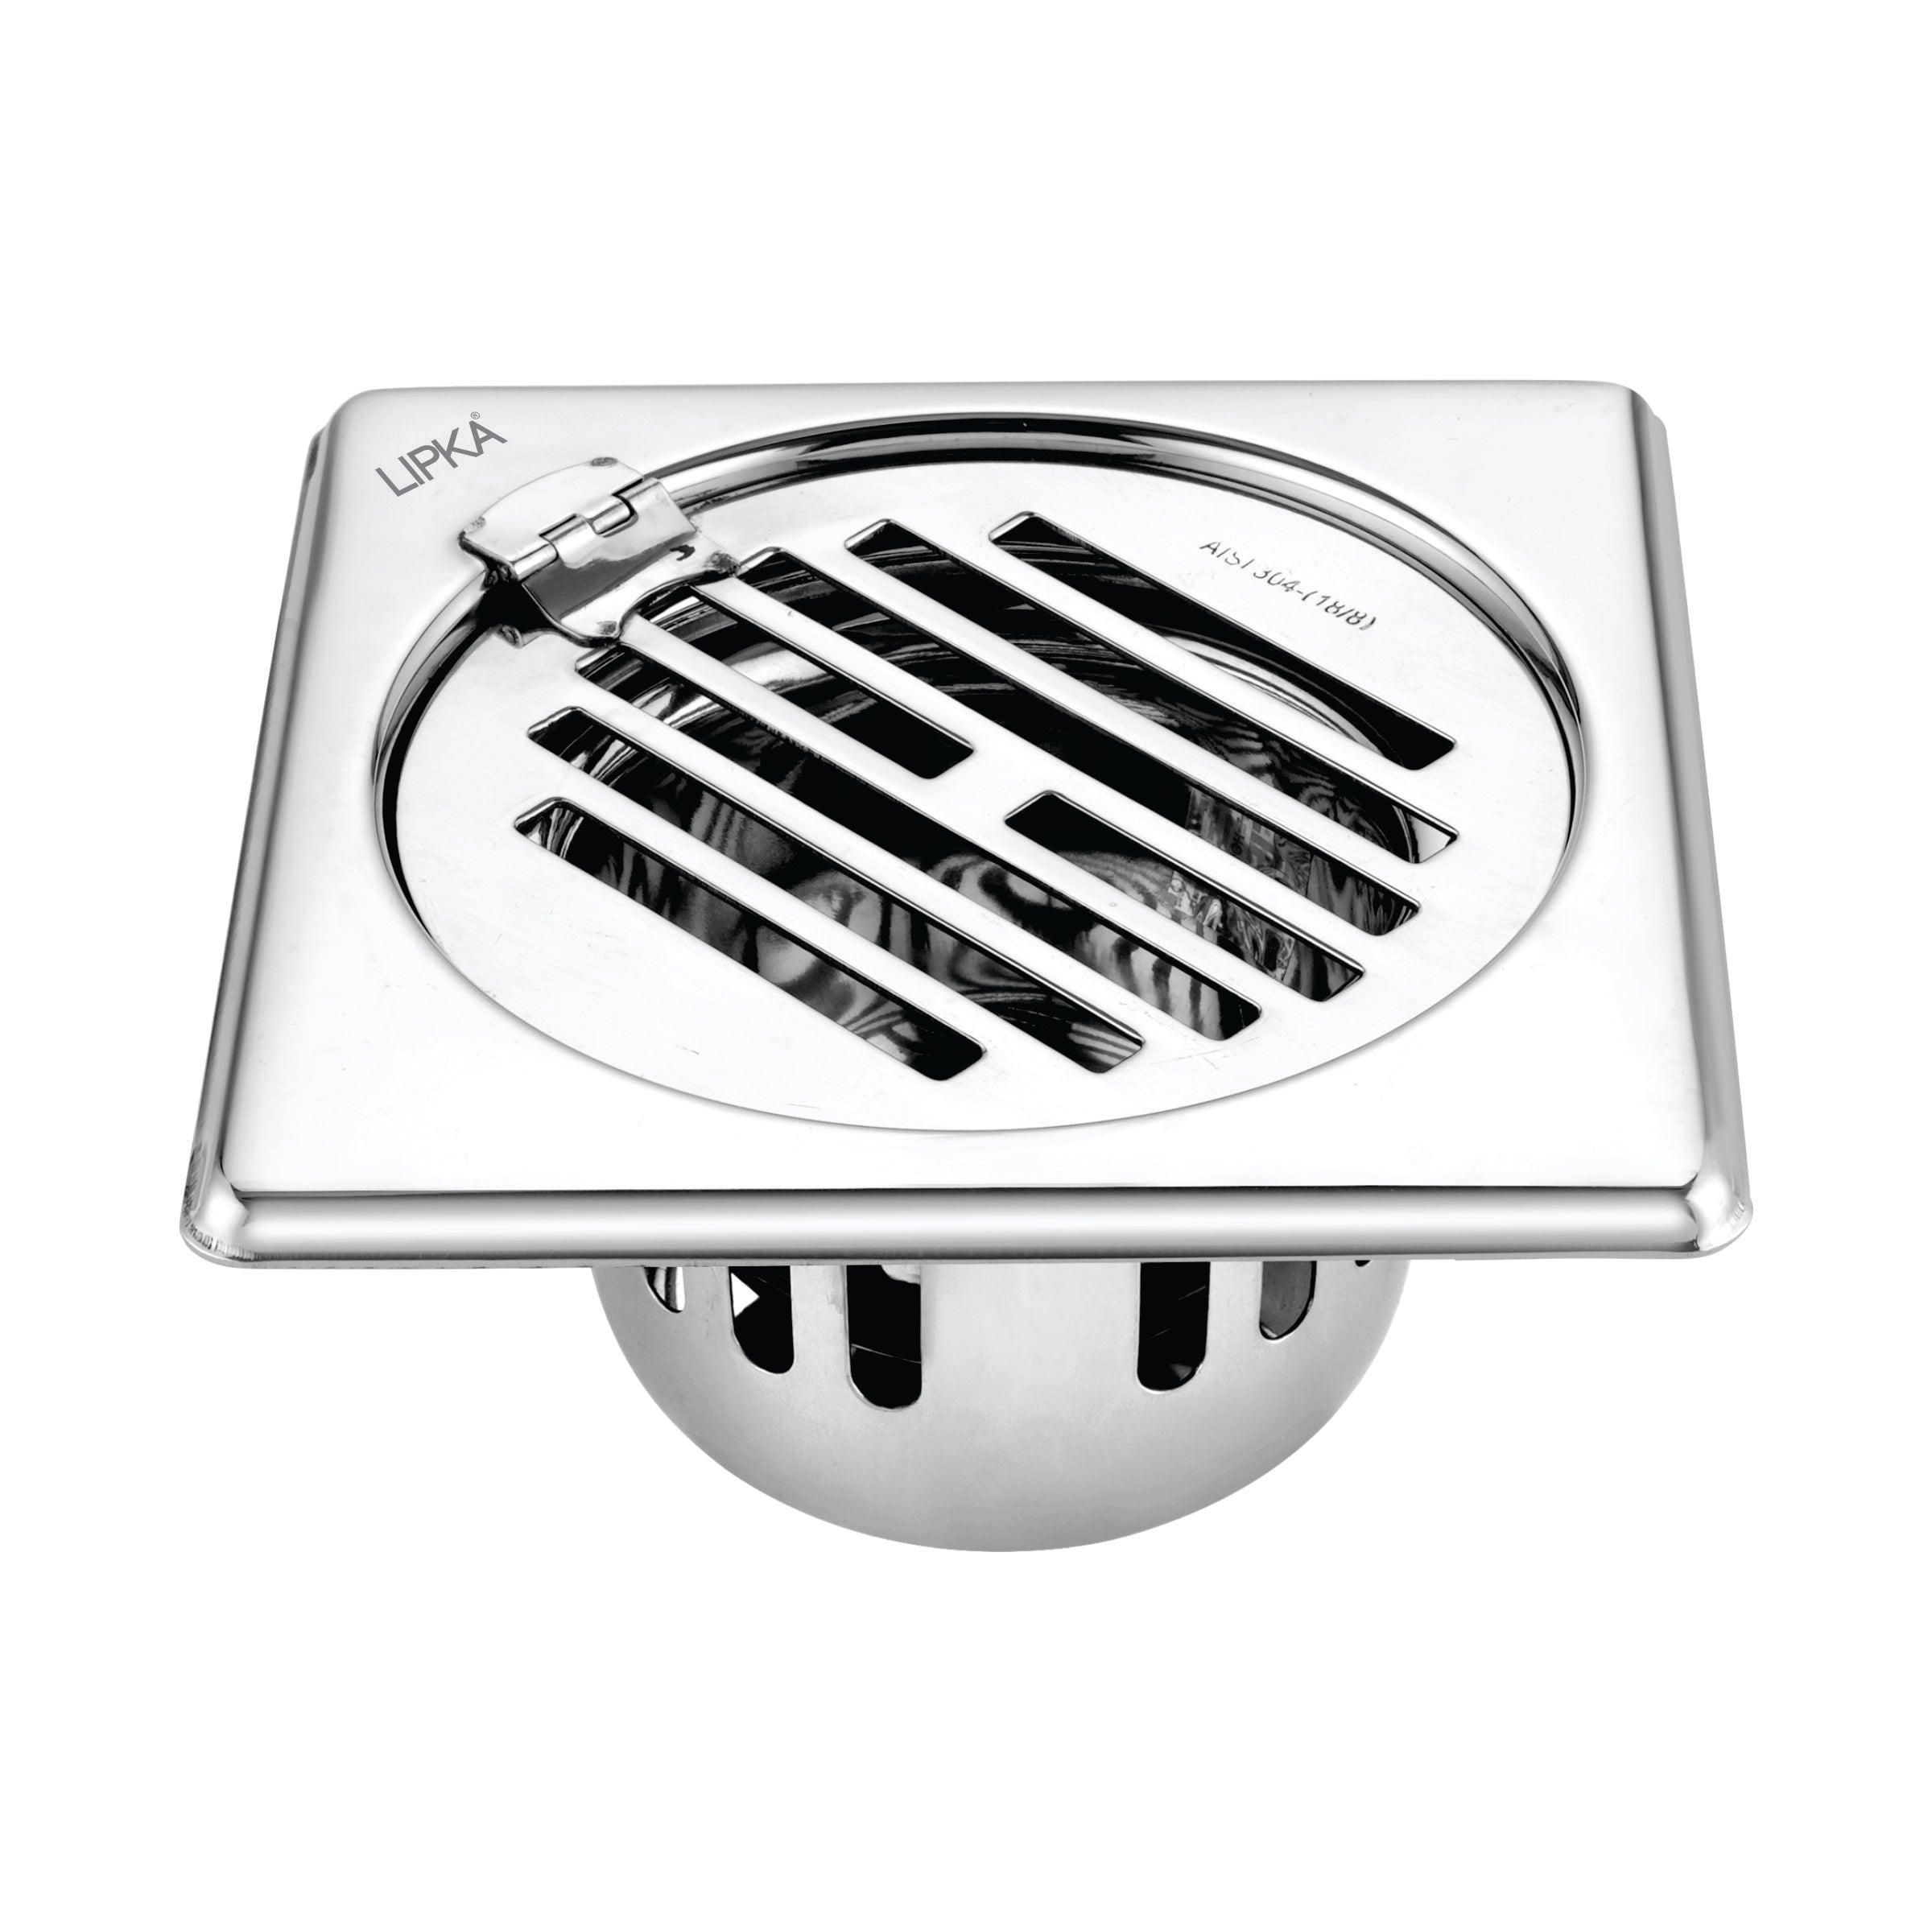 Golden Classic Jali Square Floor Drain (6 x 6 Inches) with Hinge and Cockroach Trap - LIPKA - Lipka Home